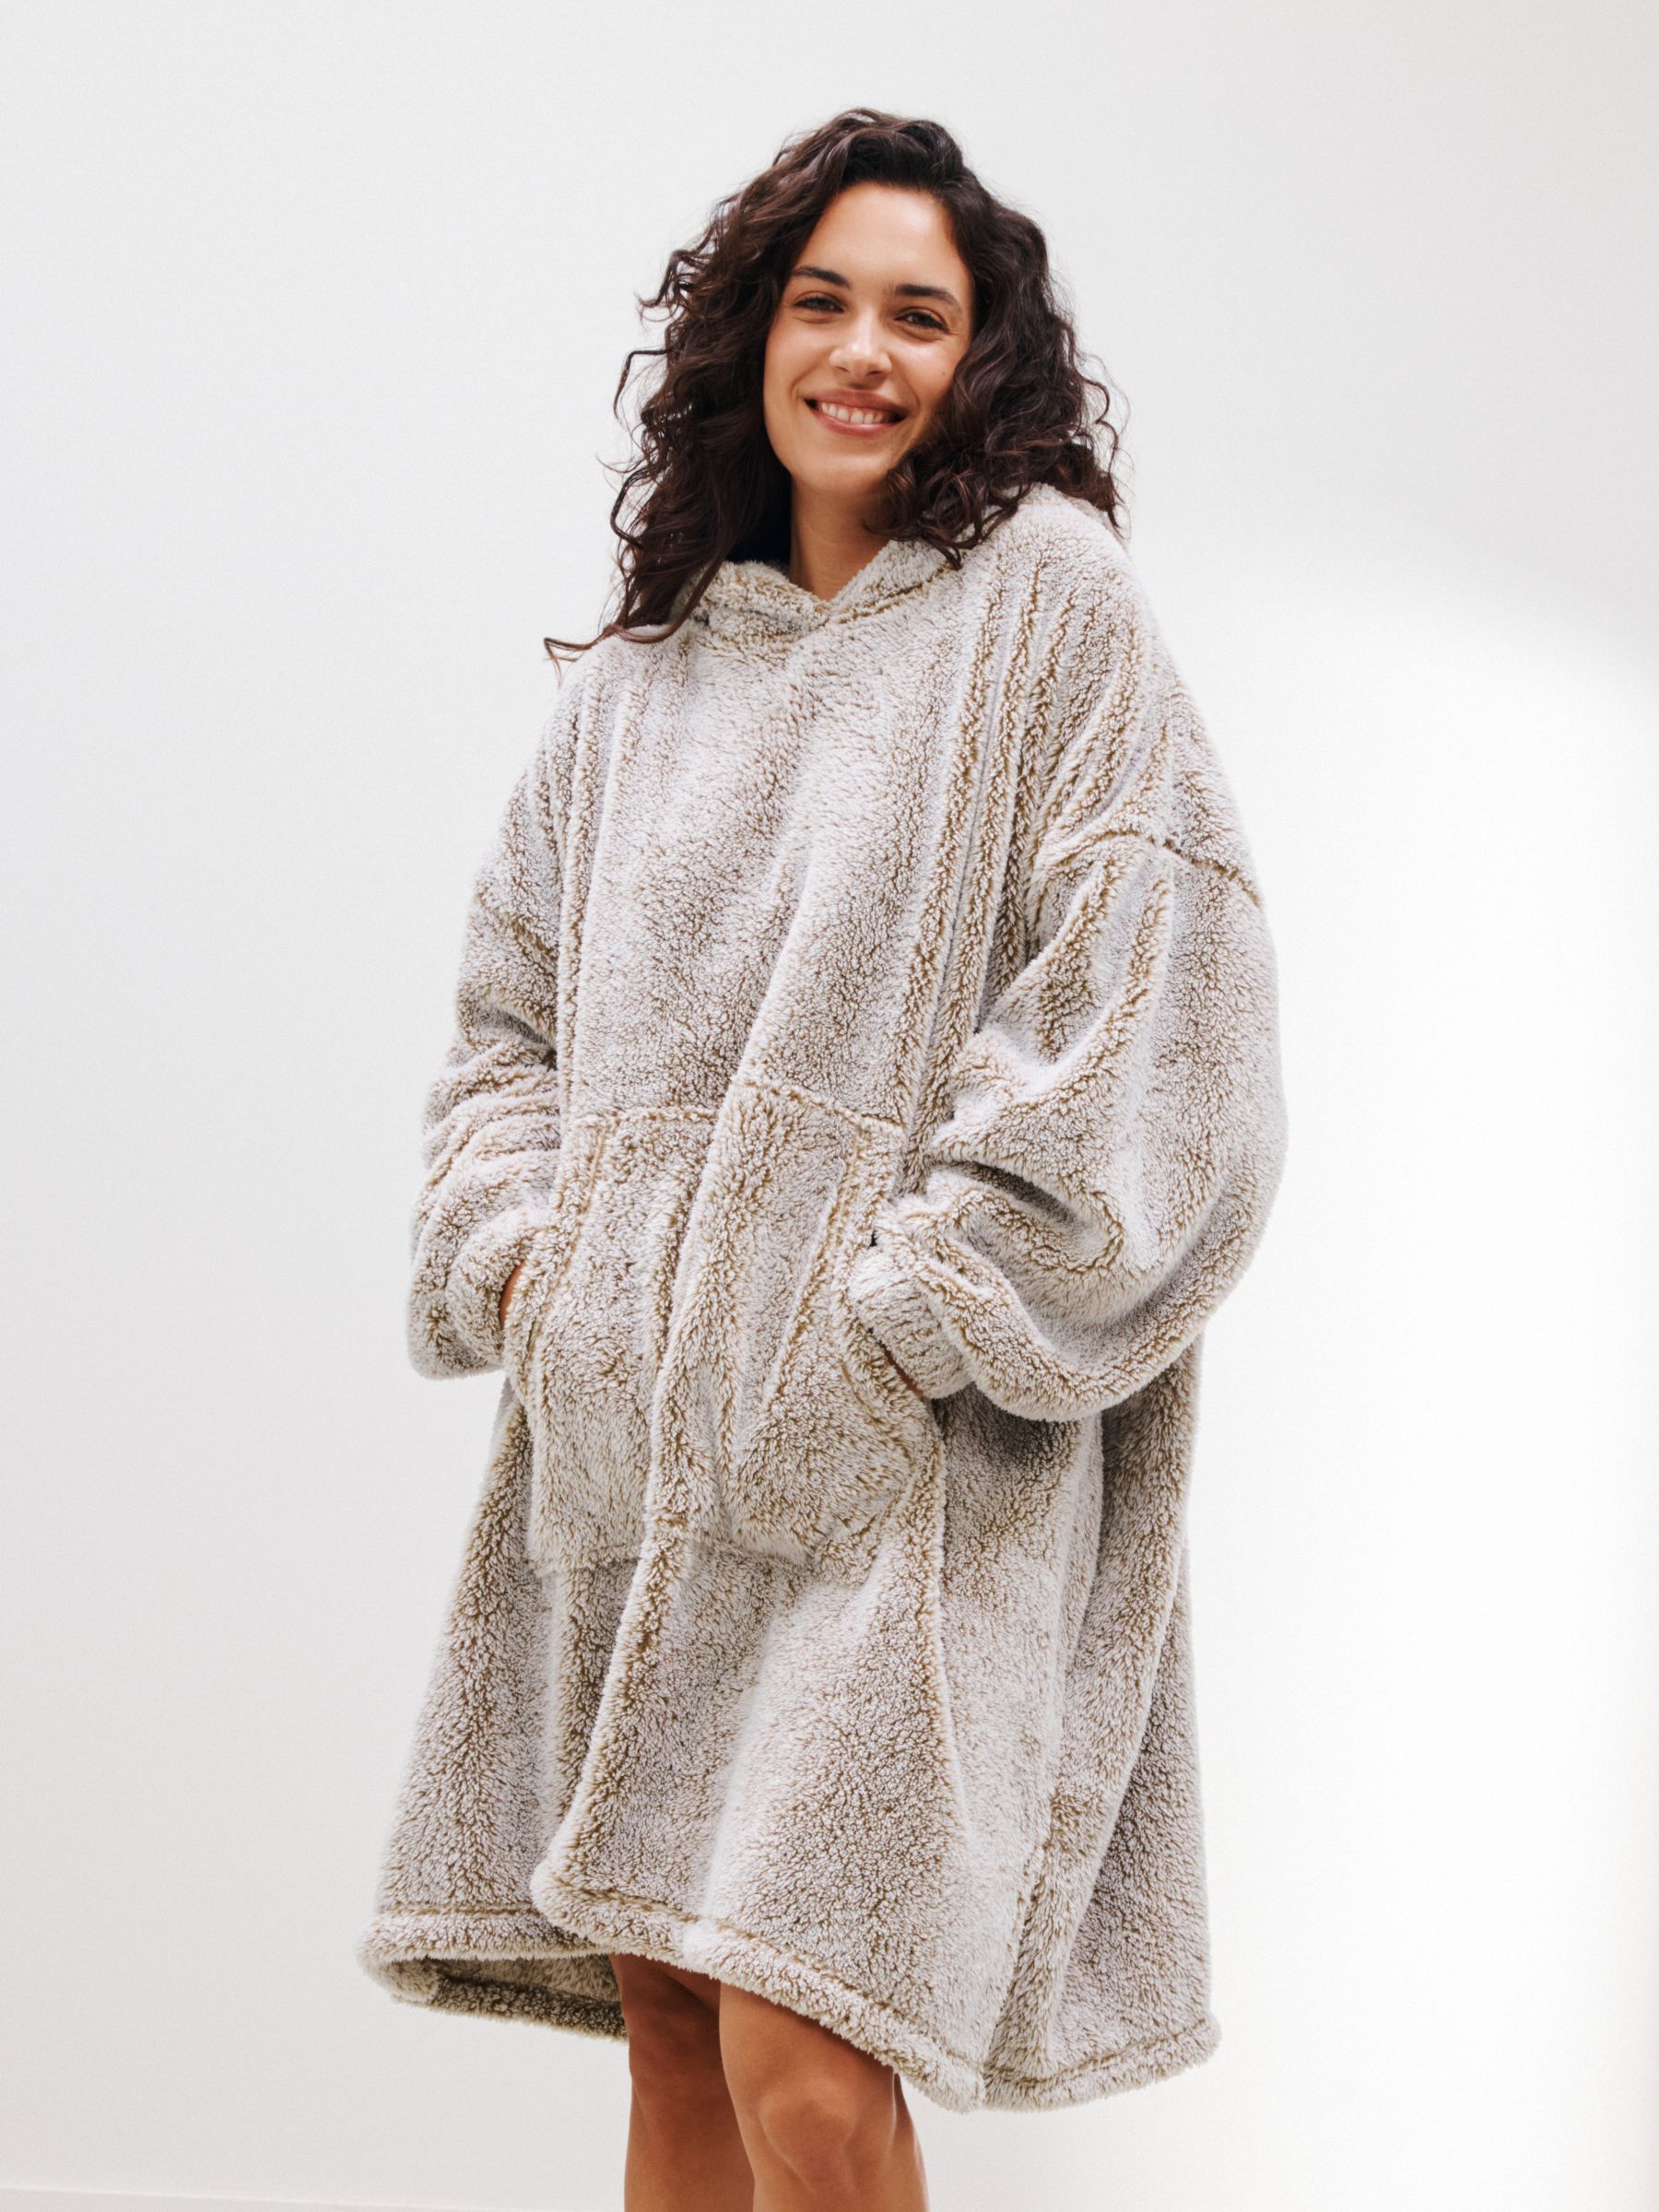 Women's Dressing Gowns & Robes